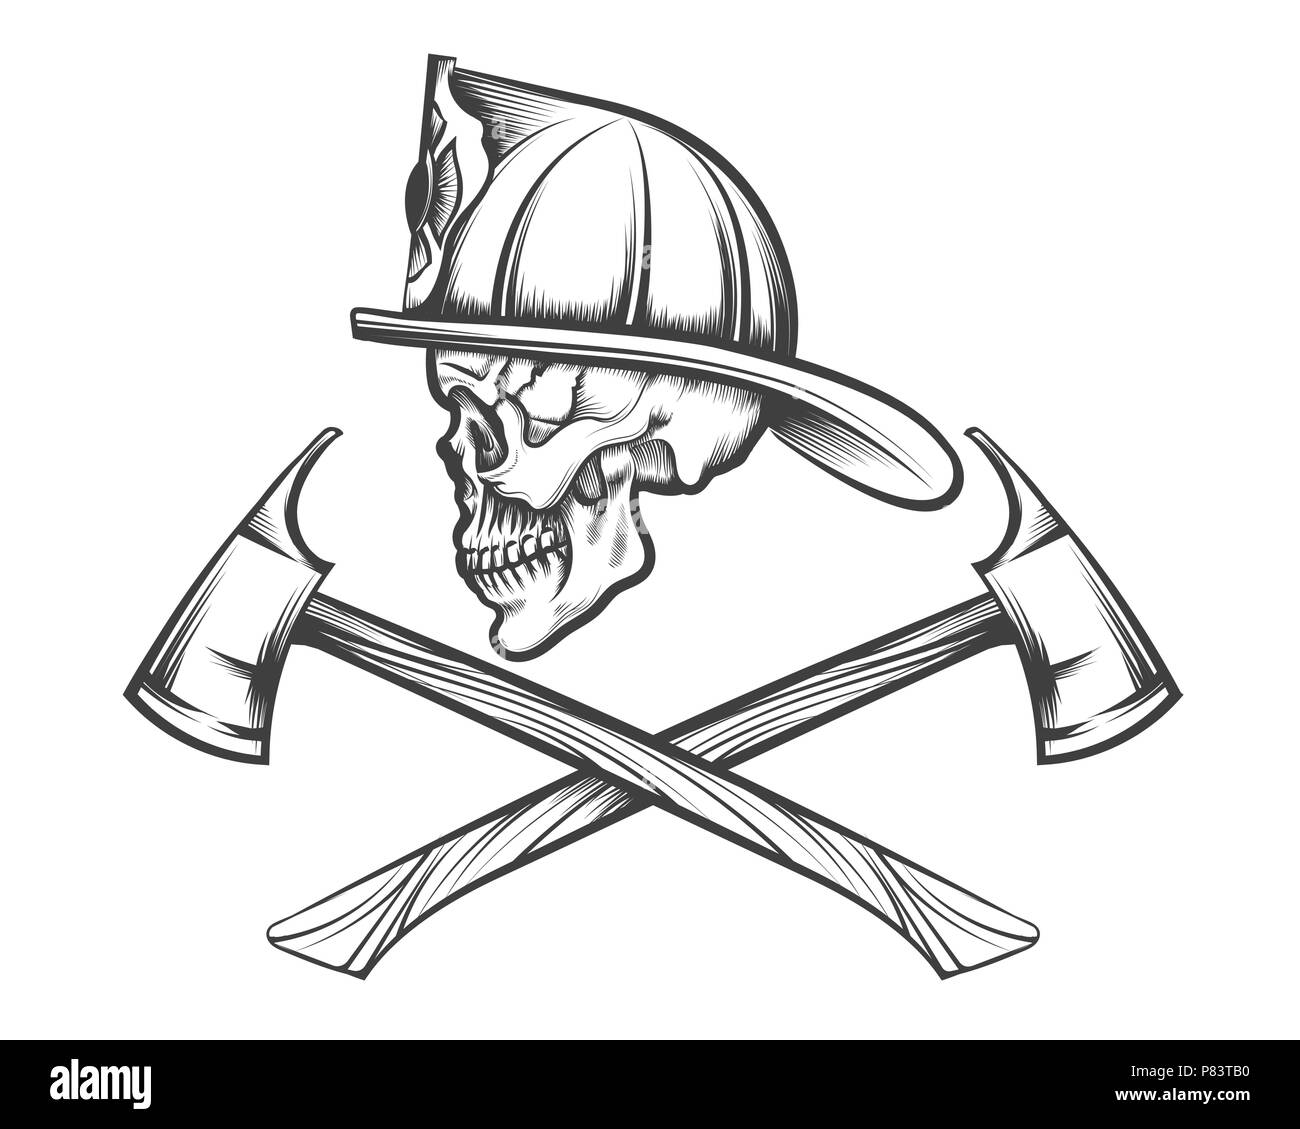 Firefighter skull logo mascot with crossed axes  CanStock